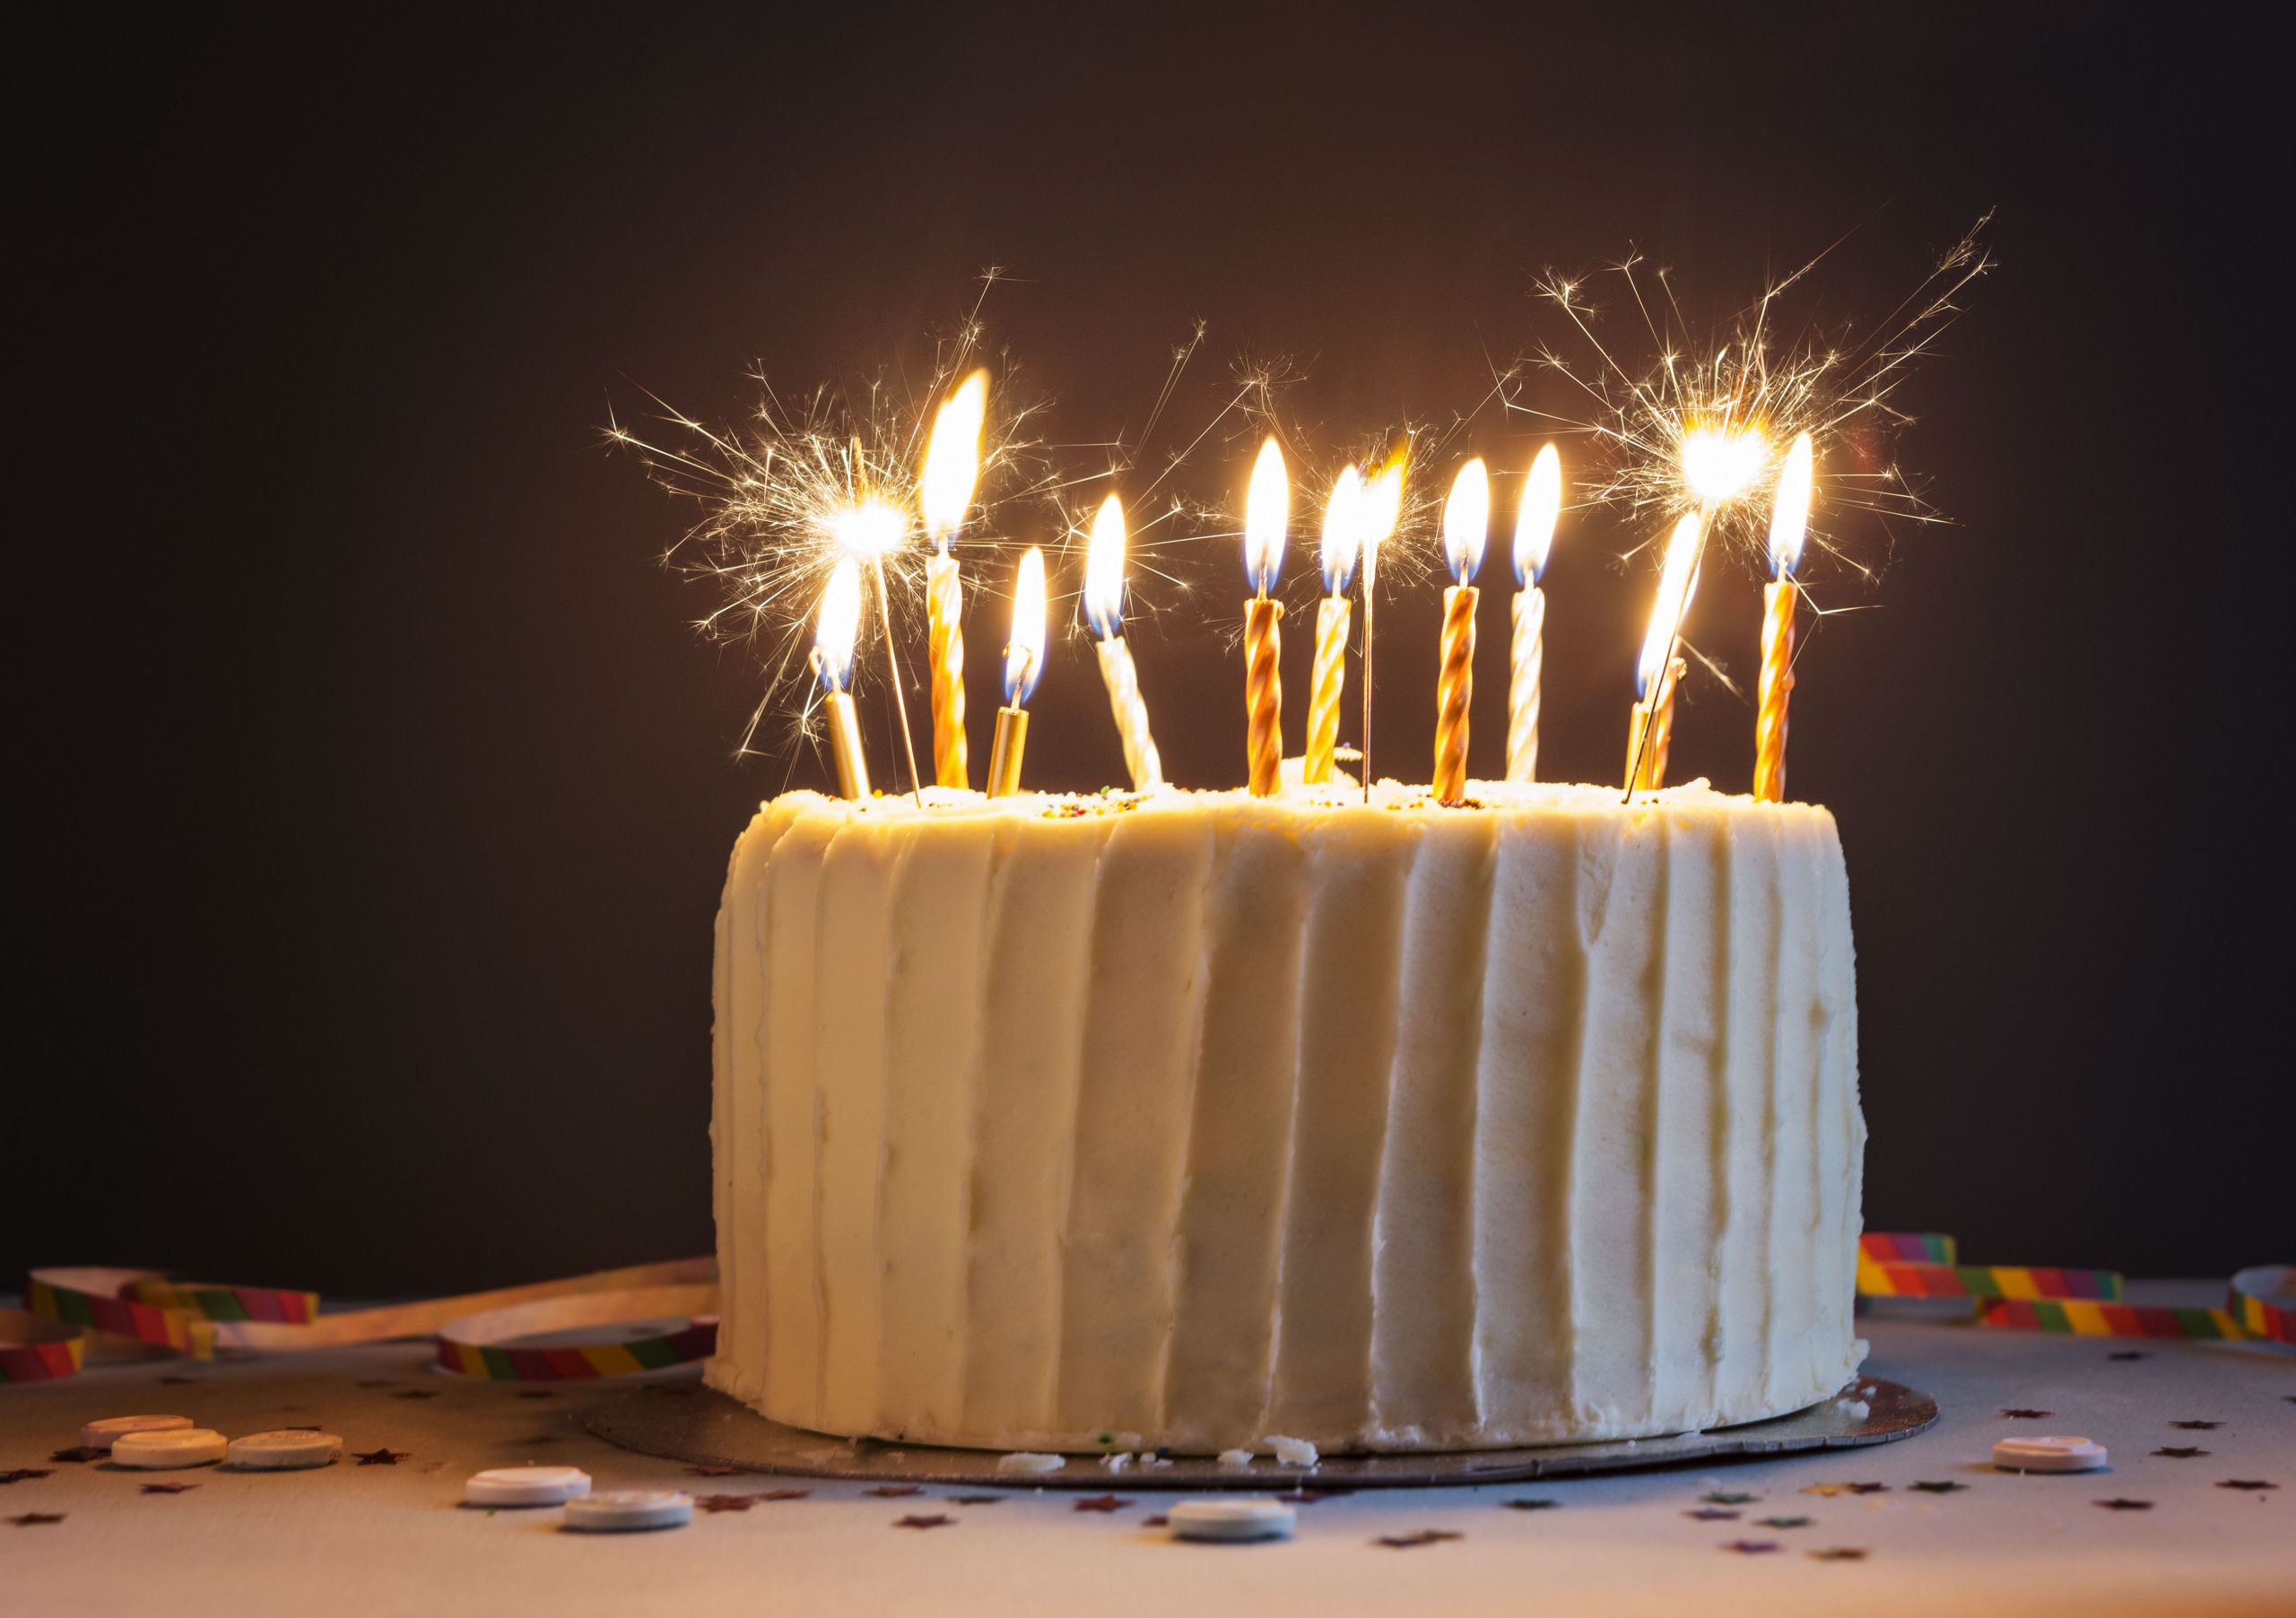 Birthday Cakes With Candles
 Are Sparklers Safe on Cakes